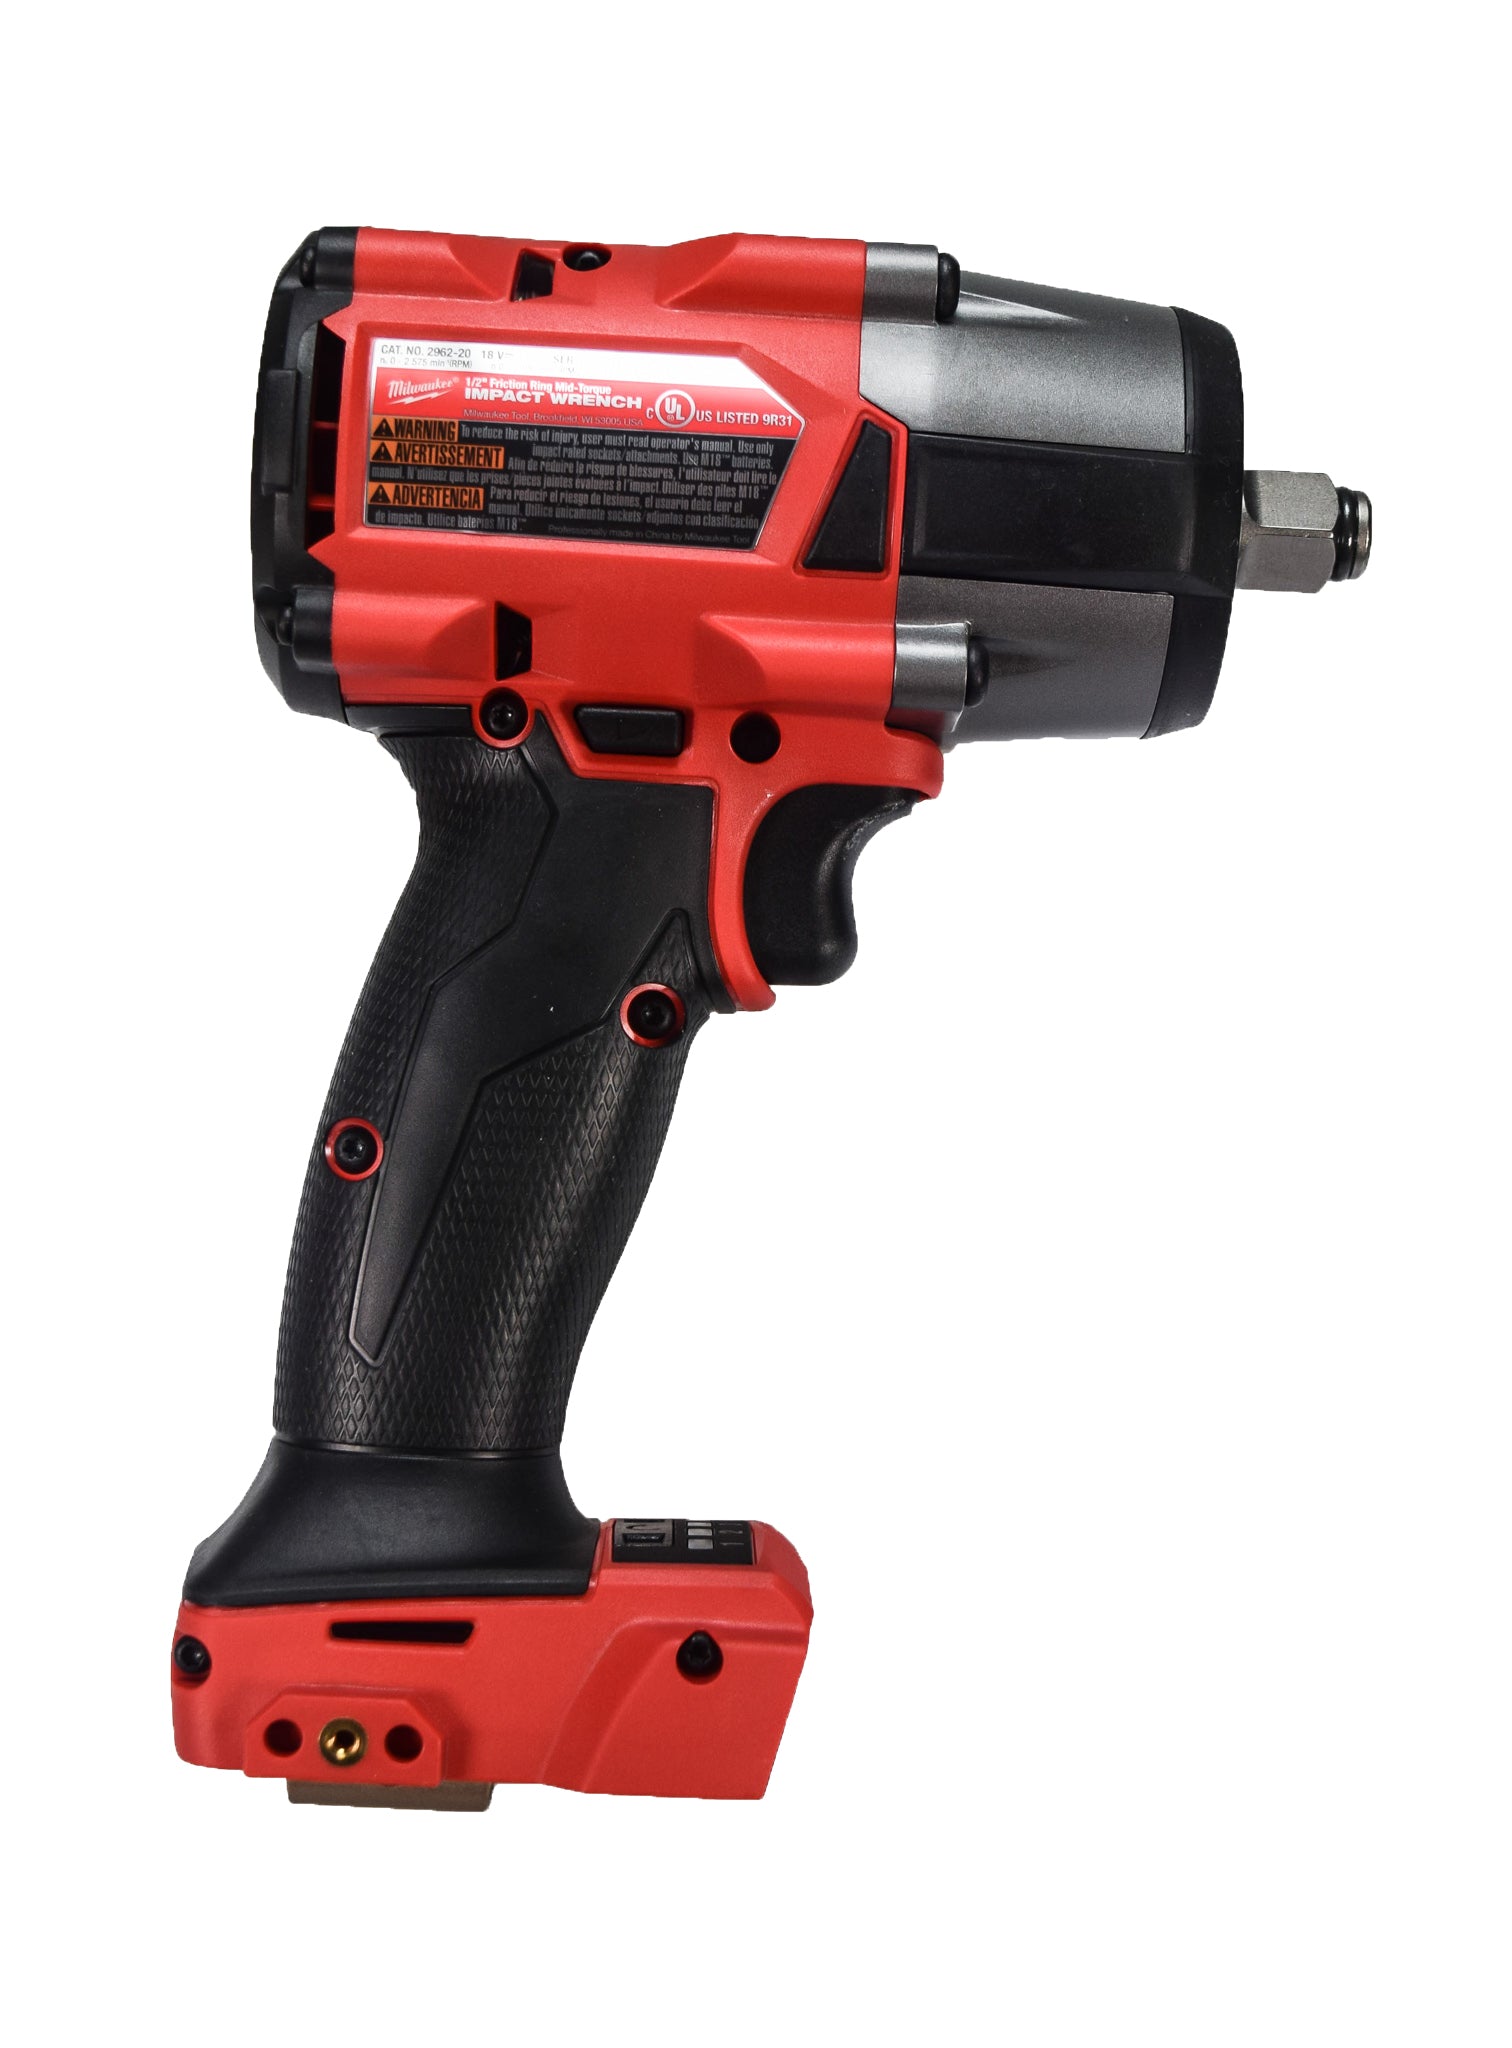 Milwaukee 2962-20 M18 18V Fuel 1/2" Mid-torque Impact Wrench with Friction Ring 2962-20